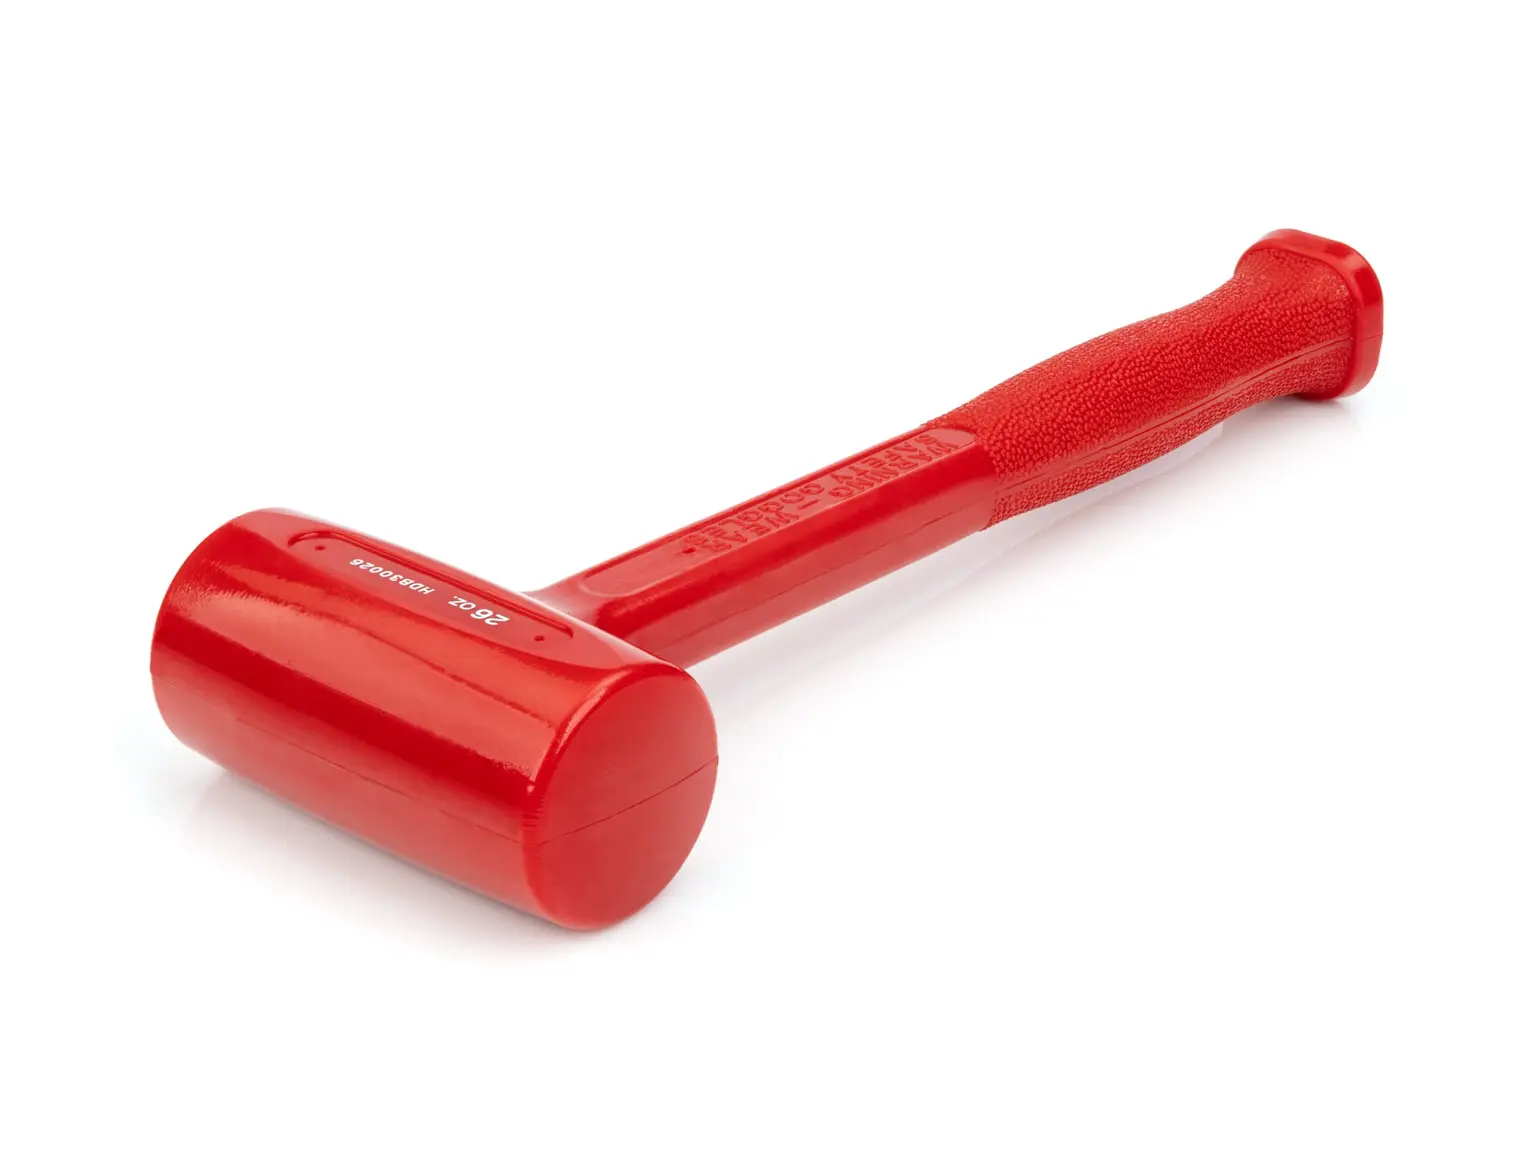 Tekton 26 oz. Dead Blow Hammer from Columbia Safety